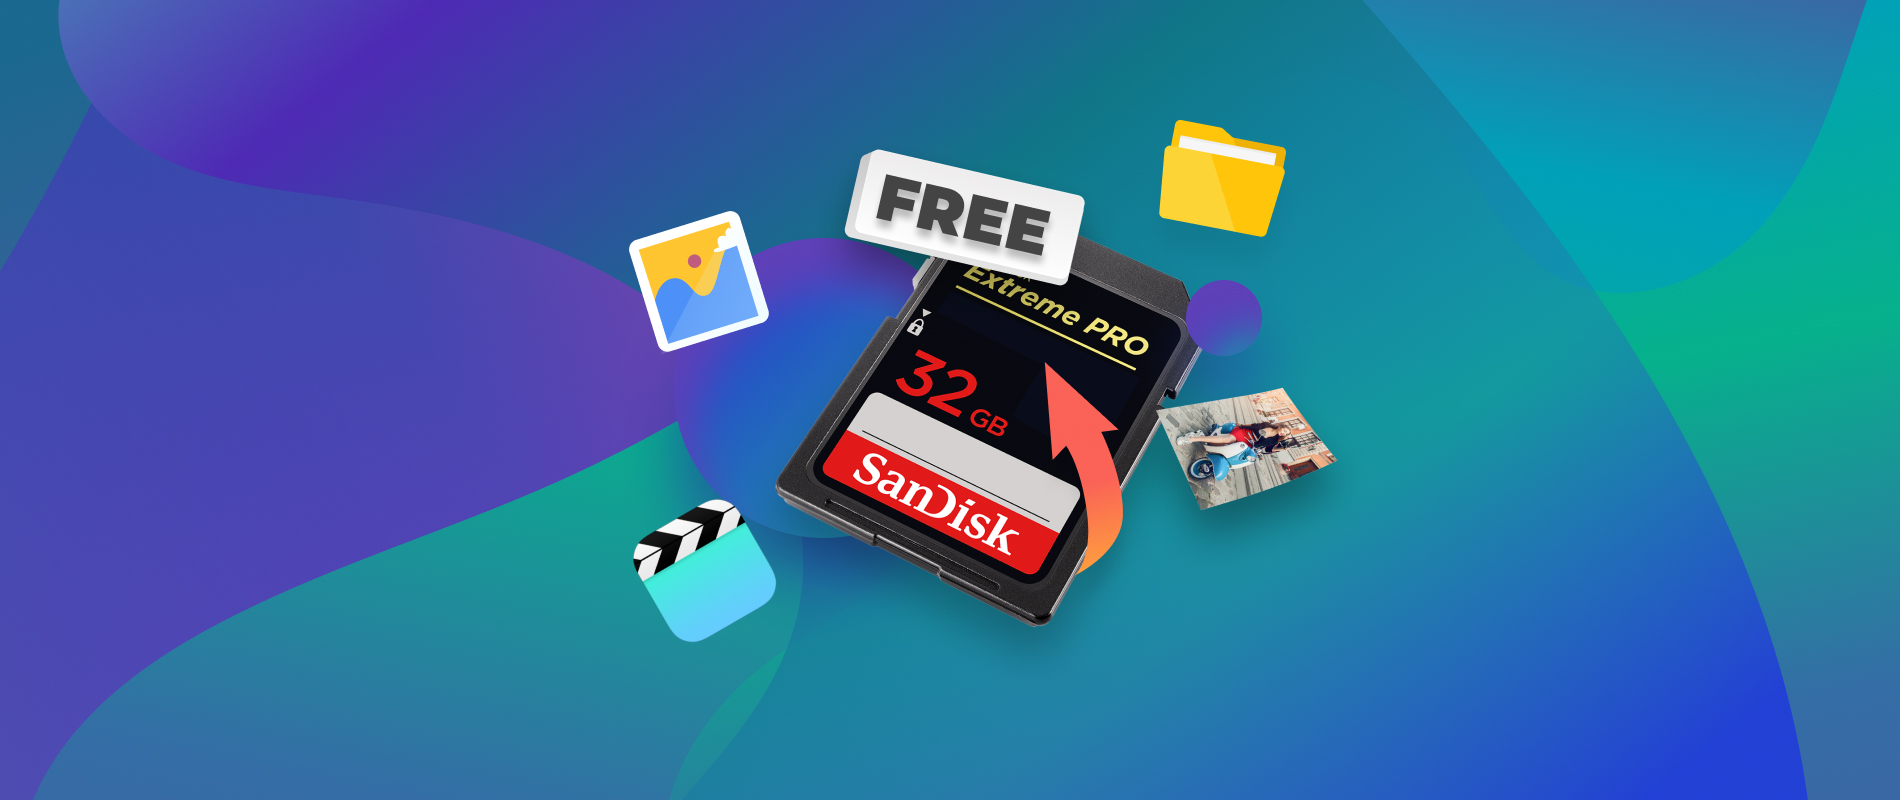 sony sd card recovery download